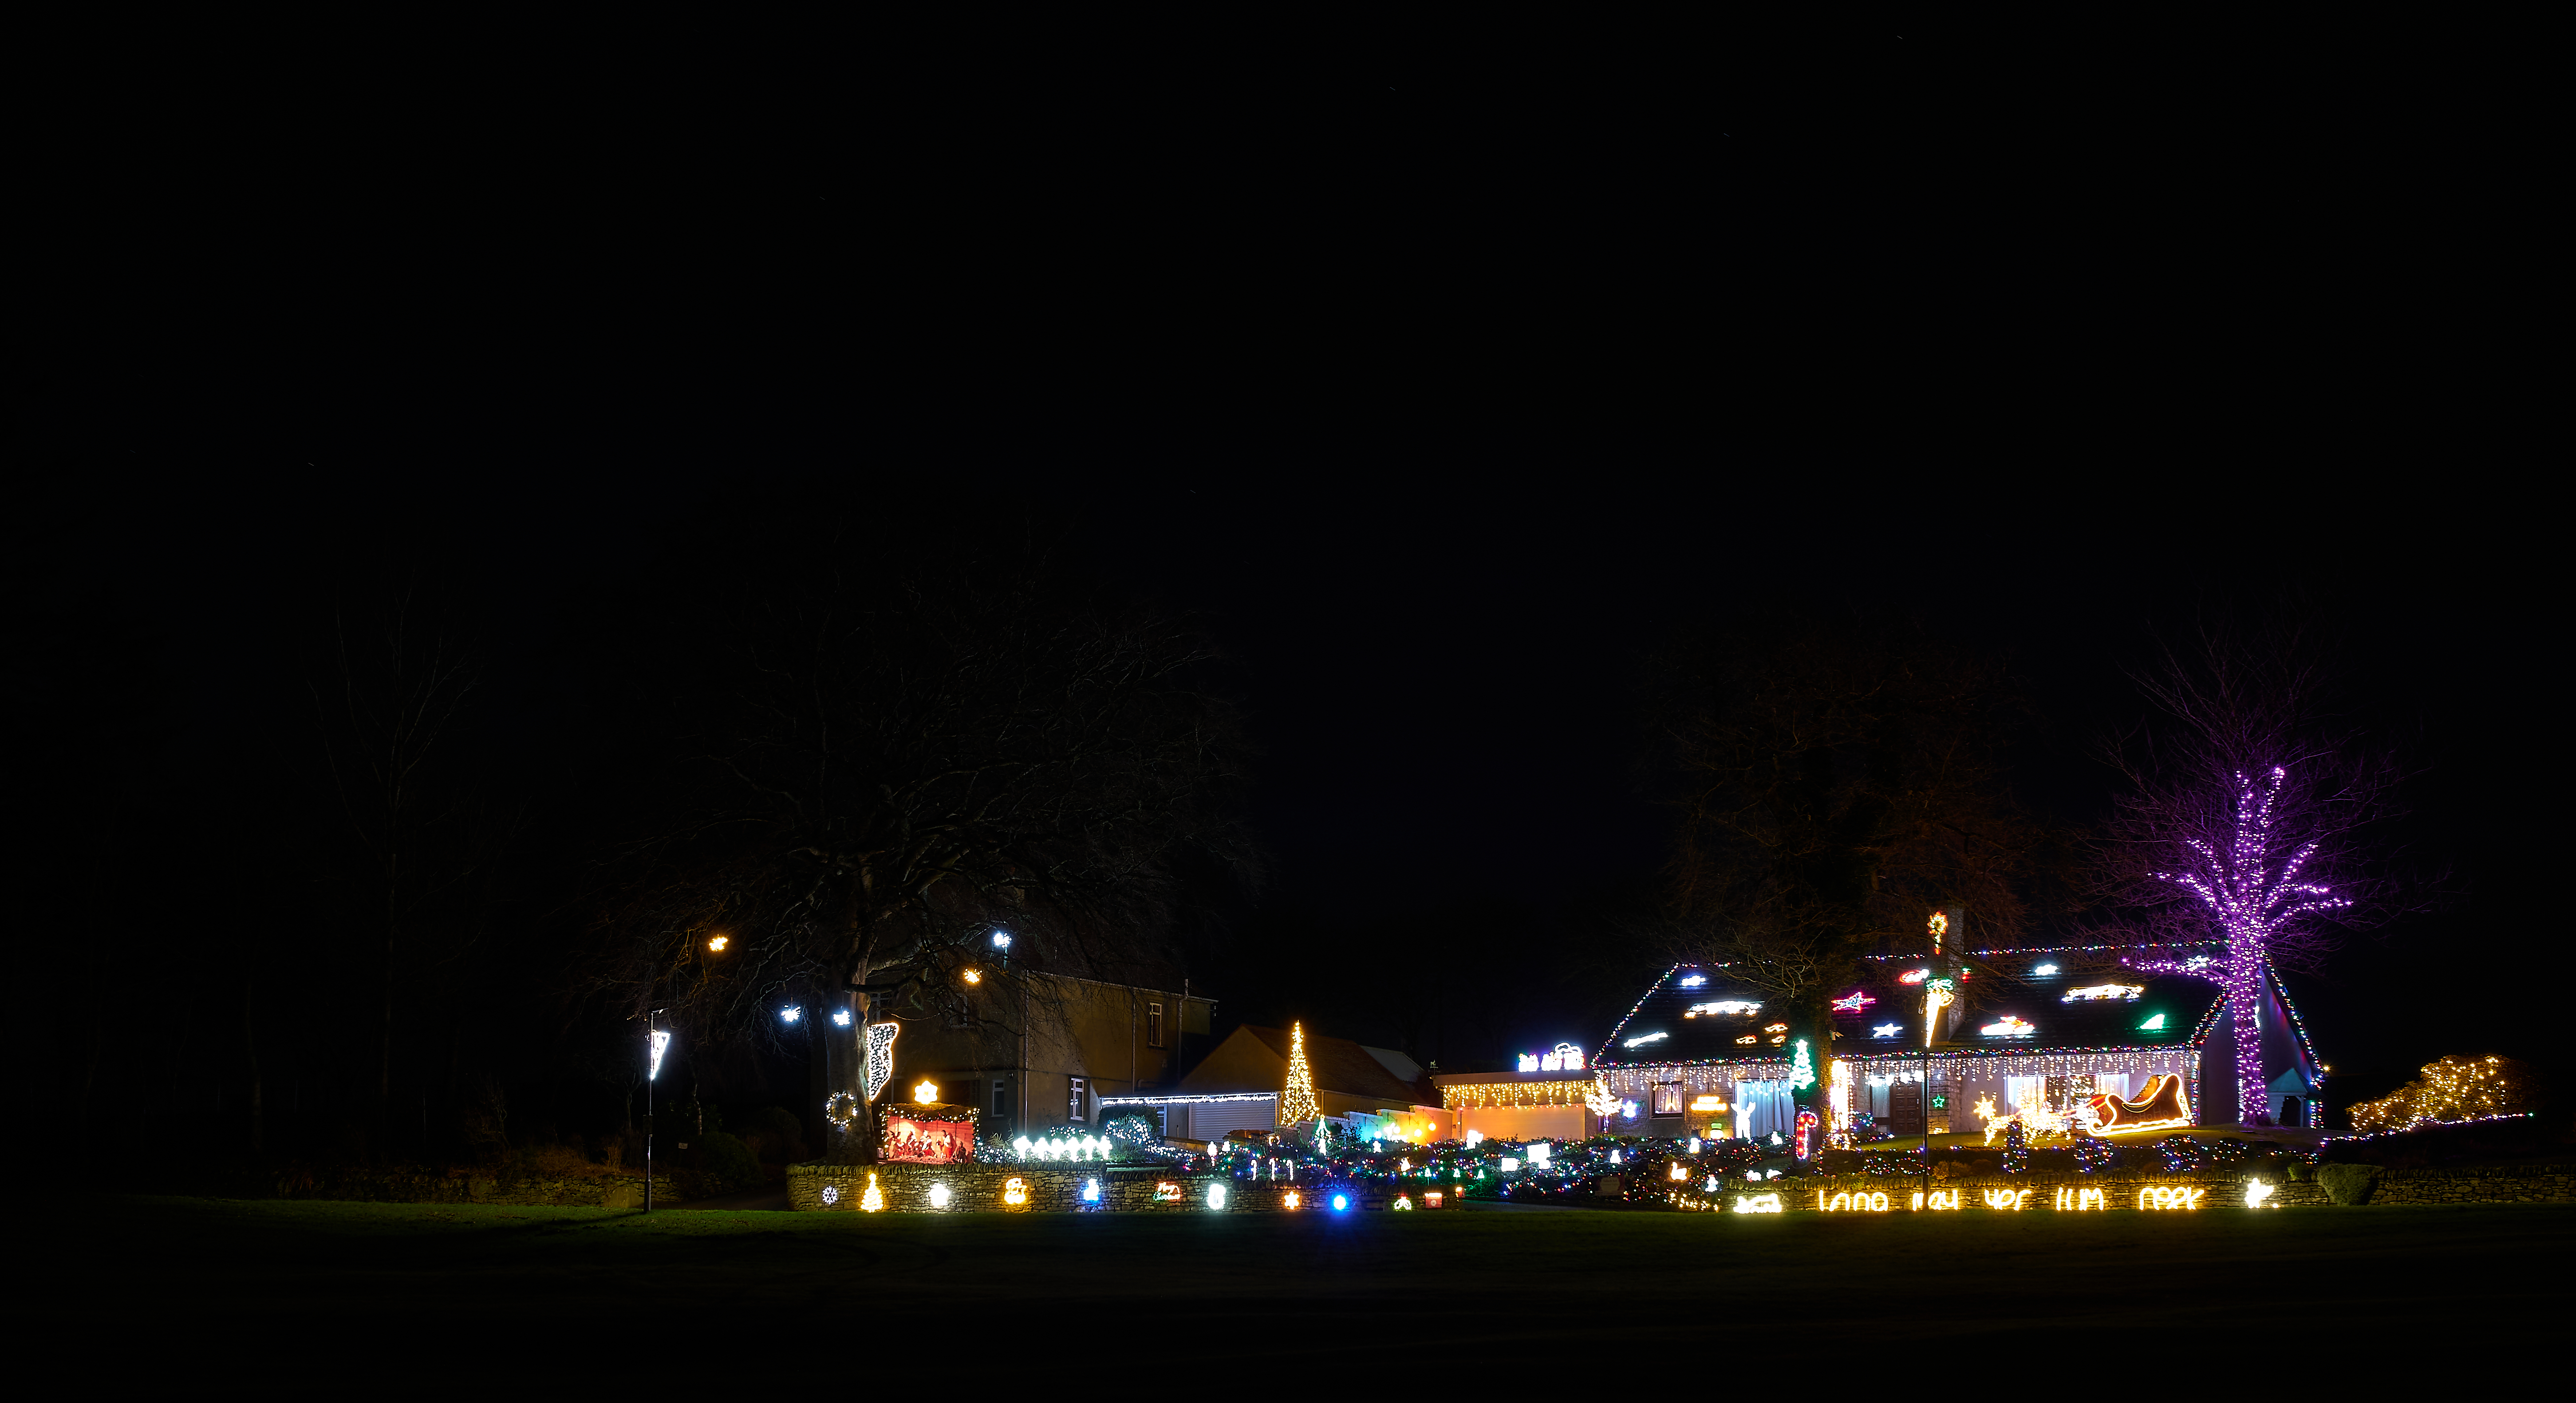 The Christmas Lights display in Seafield.